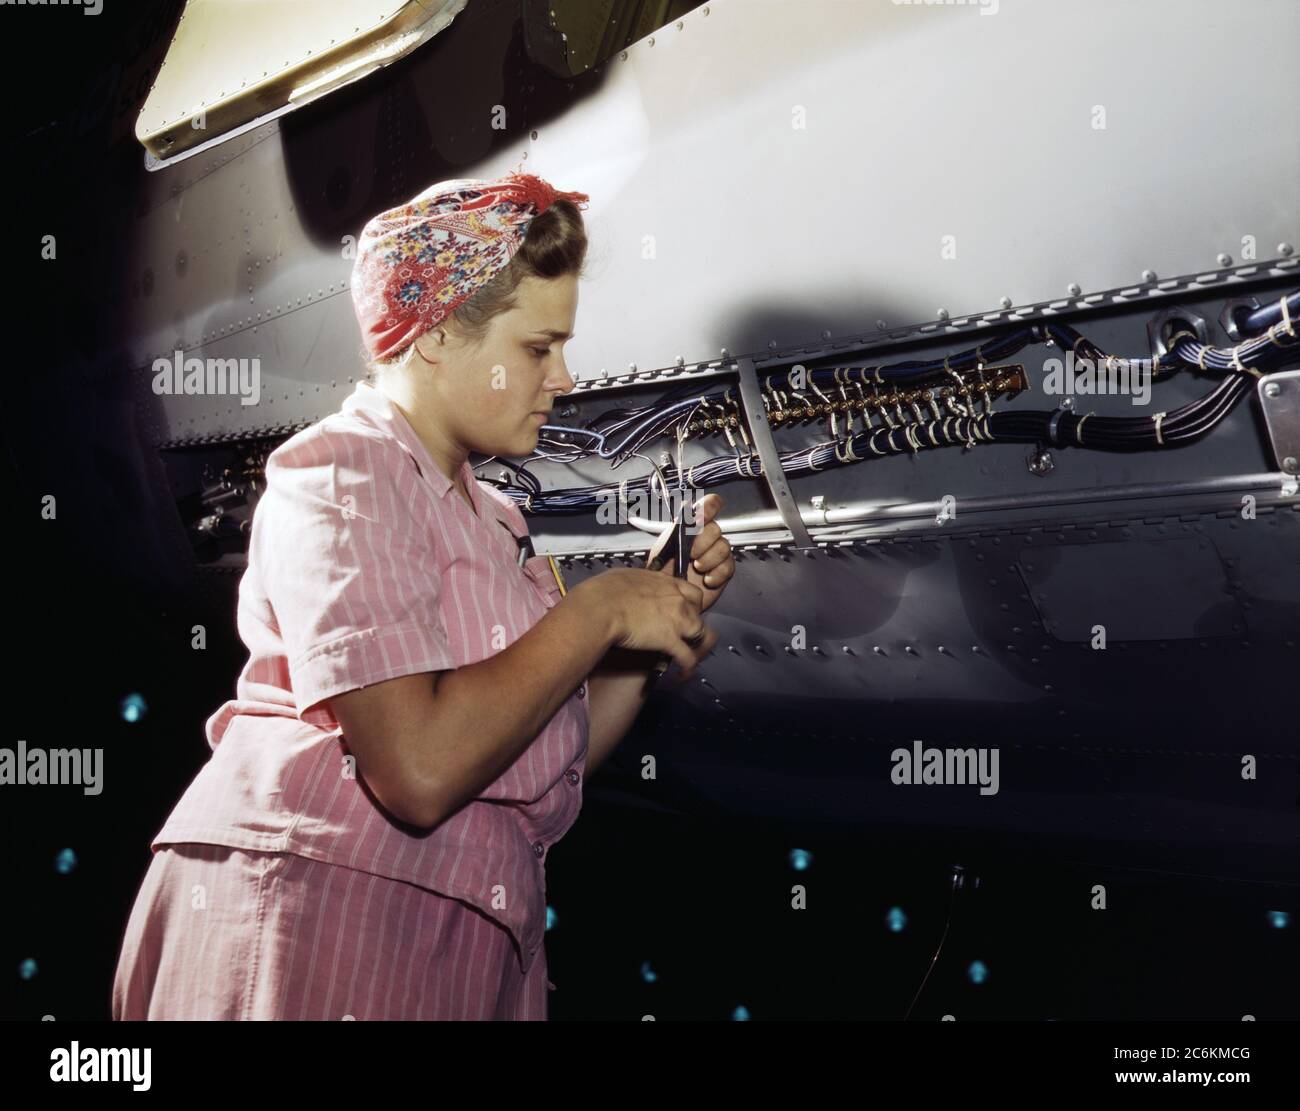 Woman working at Electrical Assembly and Installation, Douglas Aircraft Company, Long Beach, California, USA, Alfred T. Palmer, U.S. Office of War Information, October 1942 Stock Photo